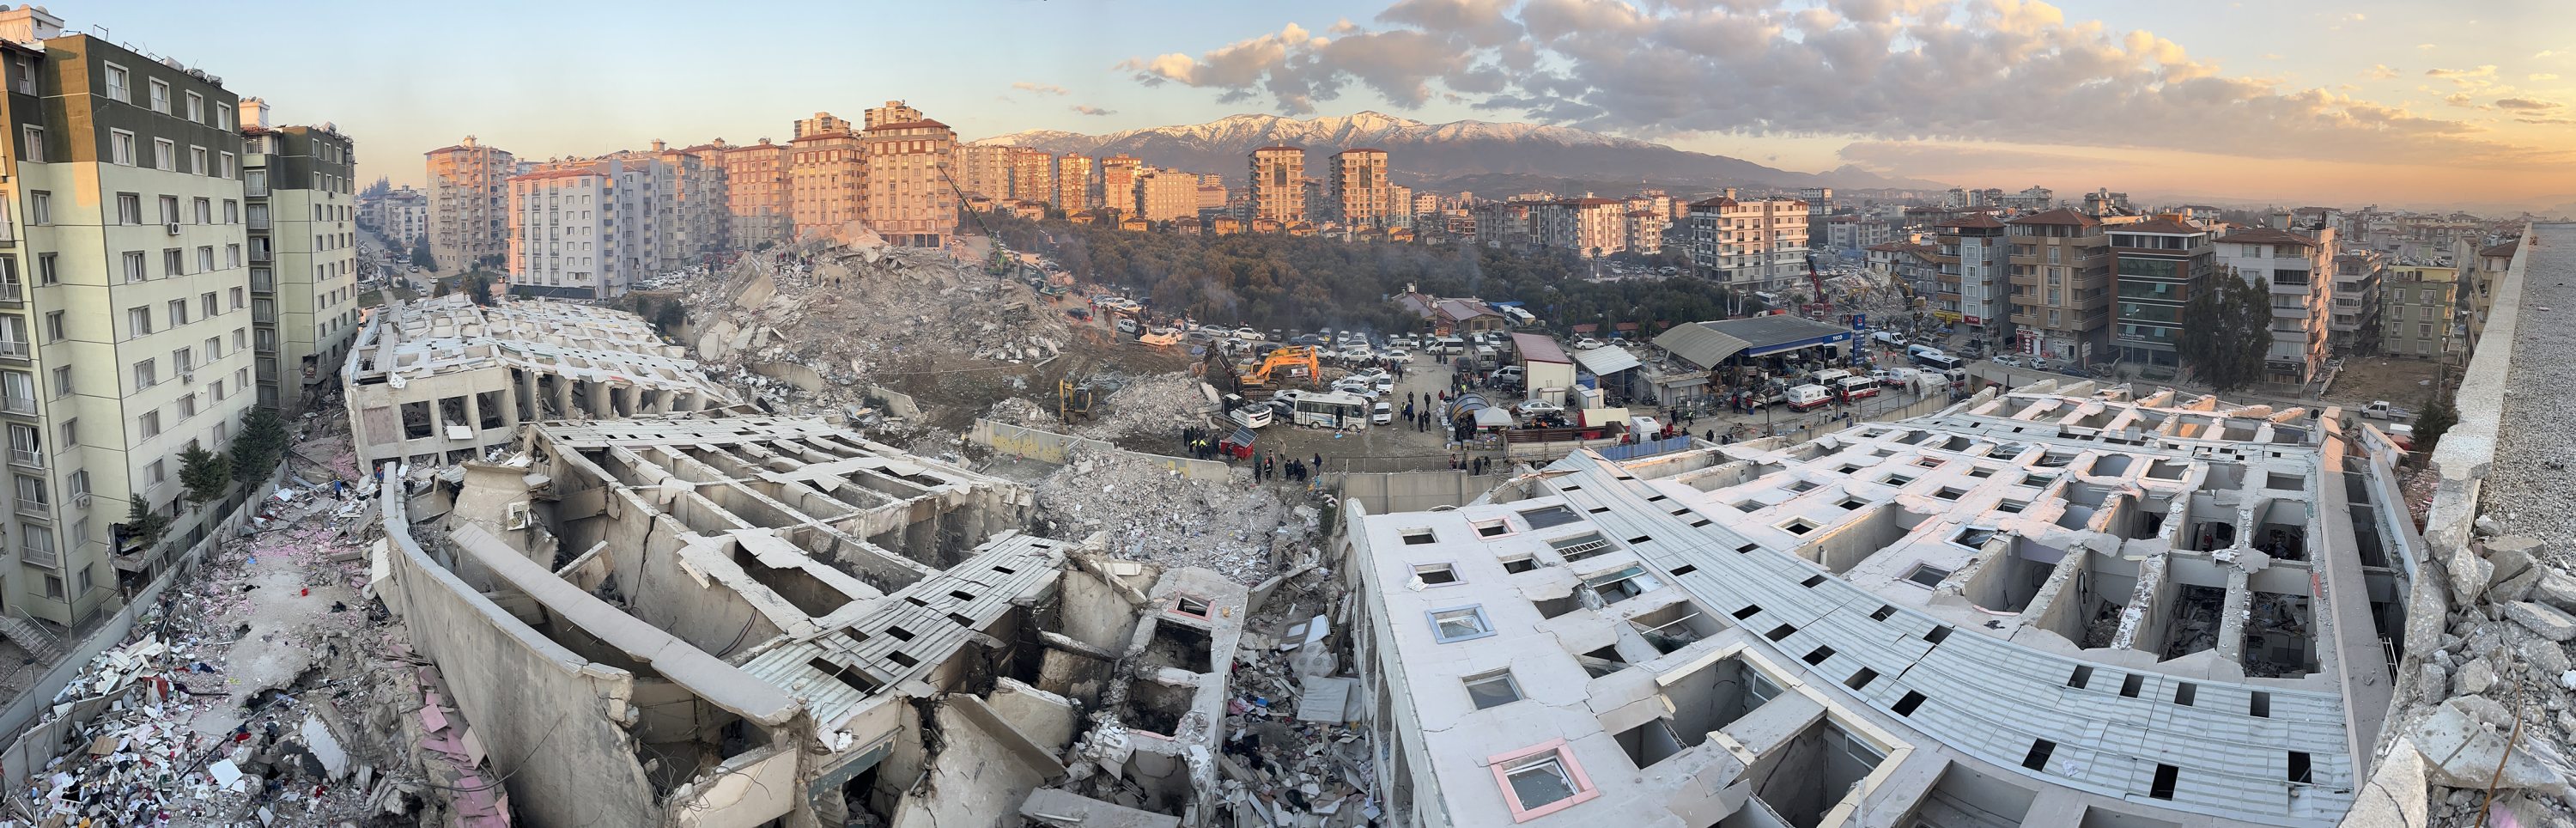 Scenery after the earthquake in Turkey